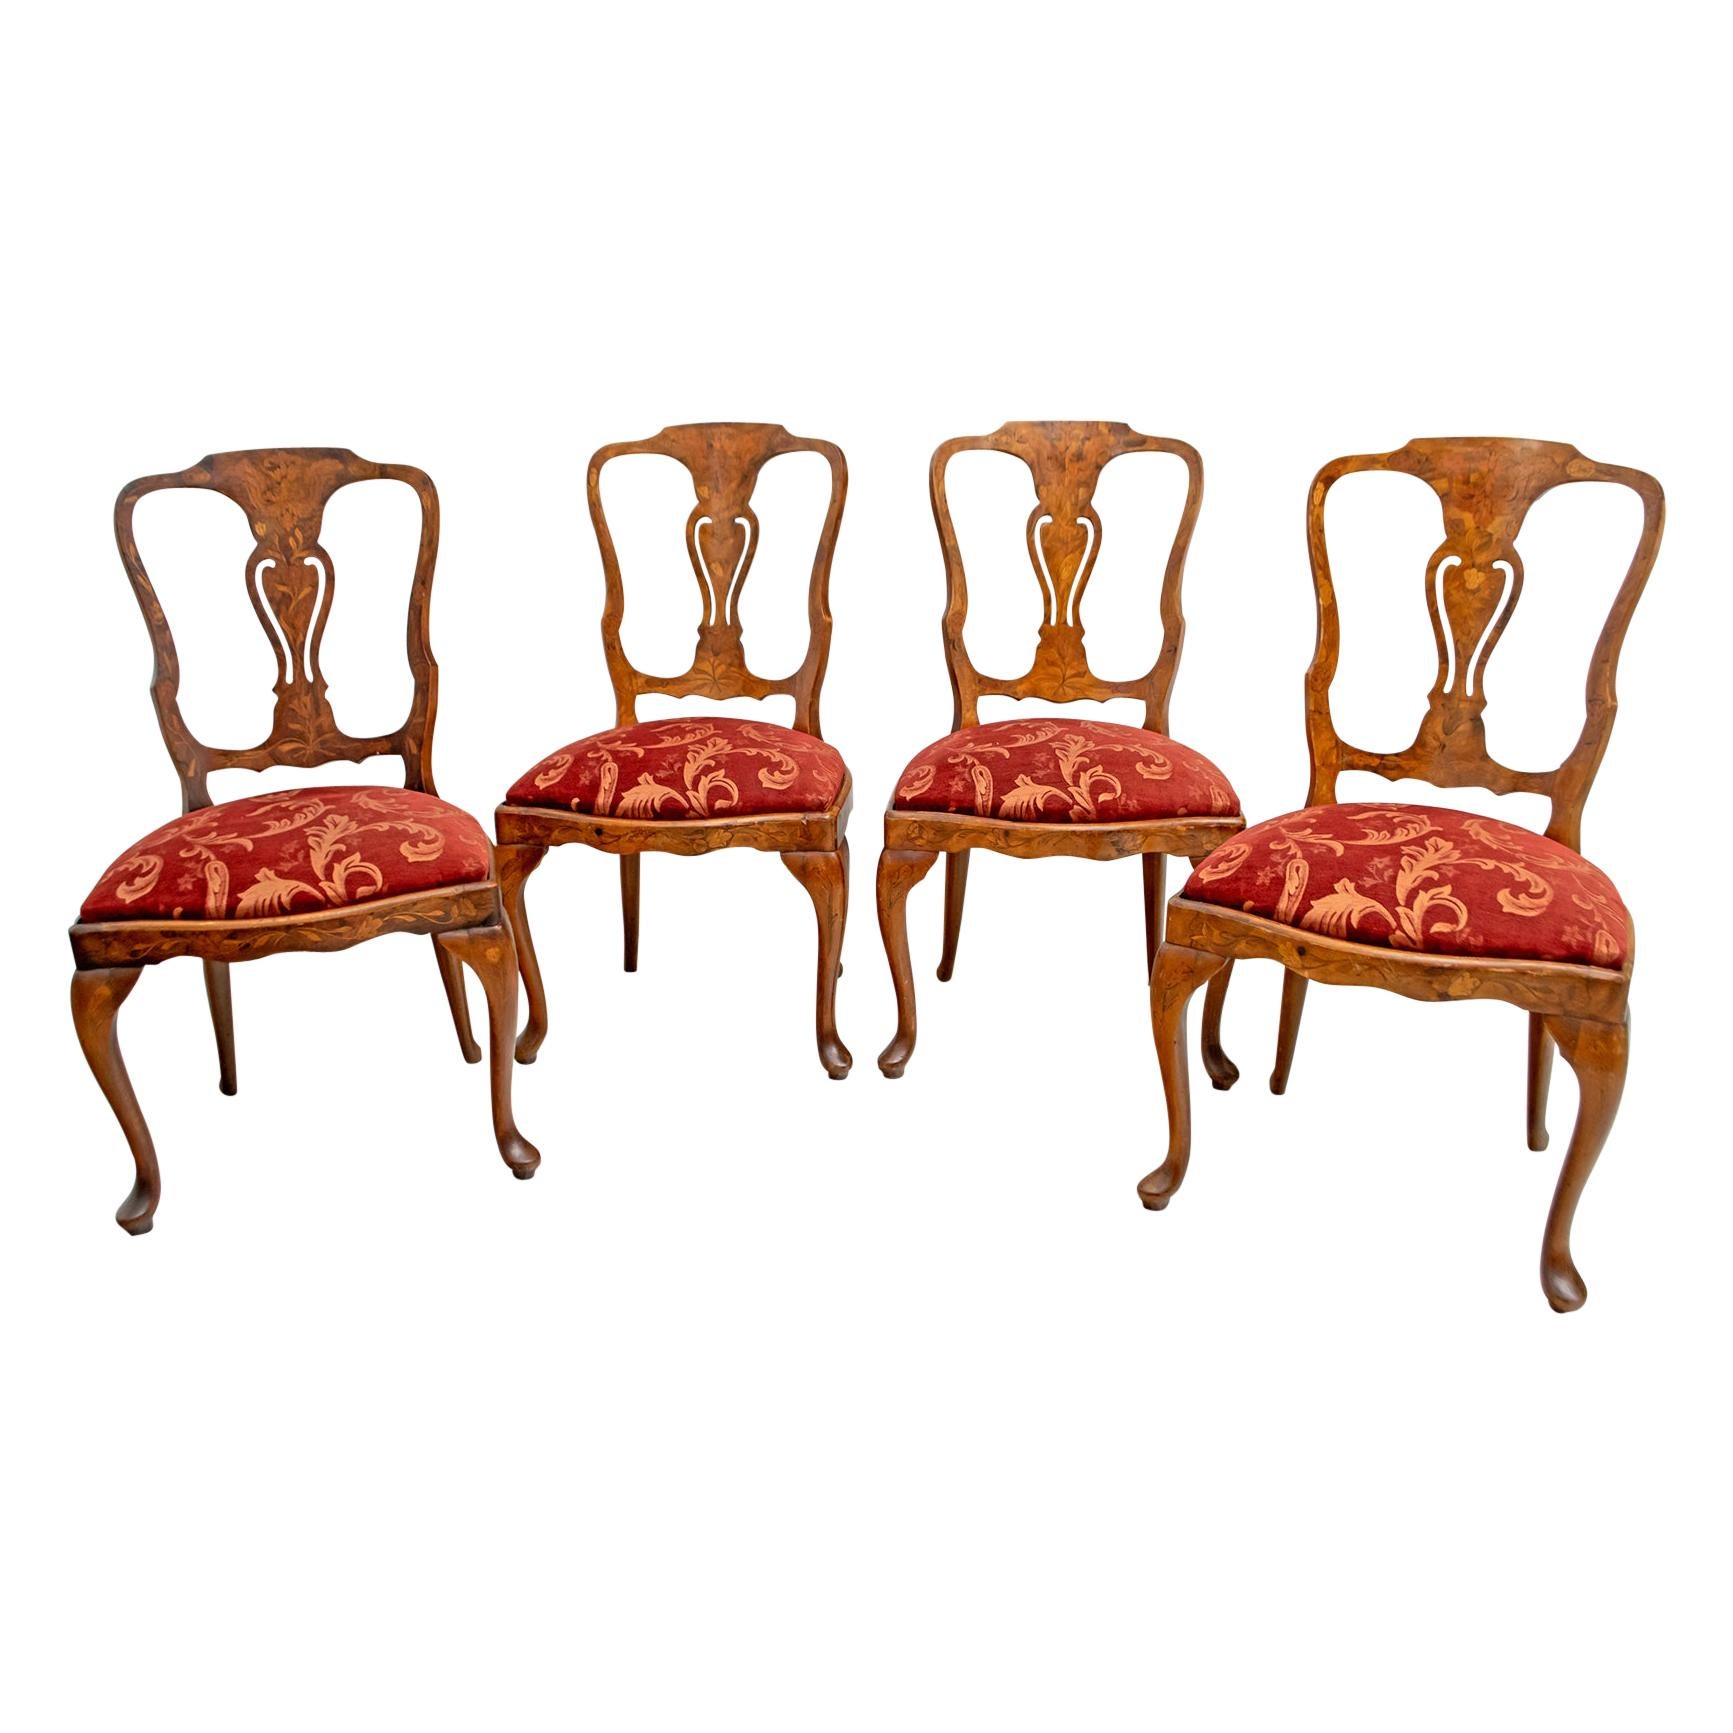 Walnut Dutch Chairs of the 20th Century with Maple Wood Inlays, Netherlands